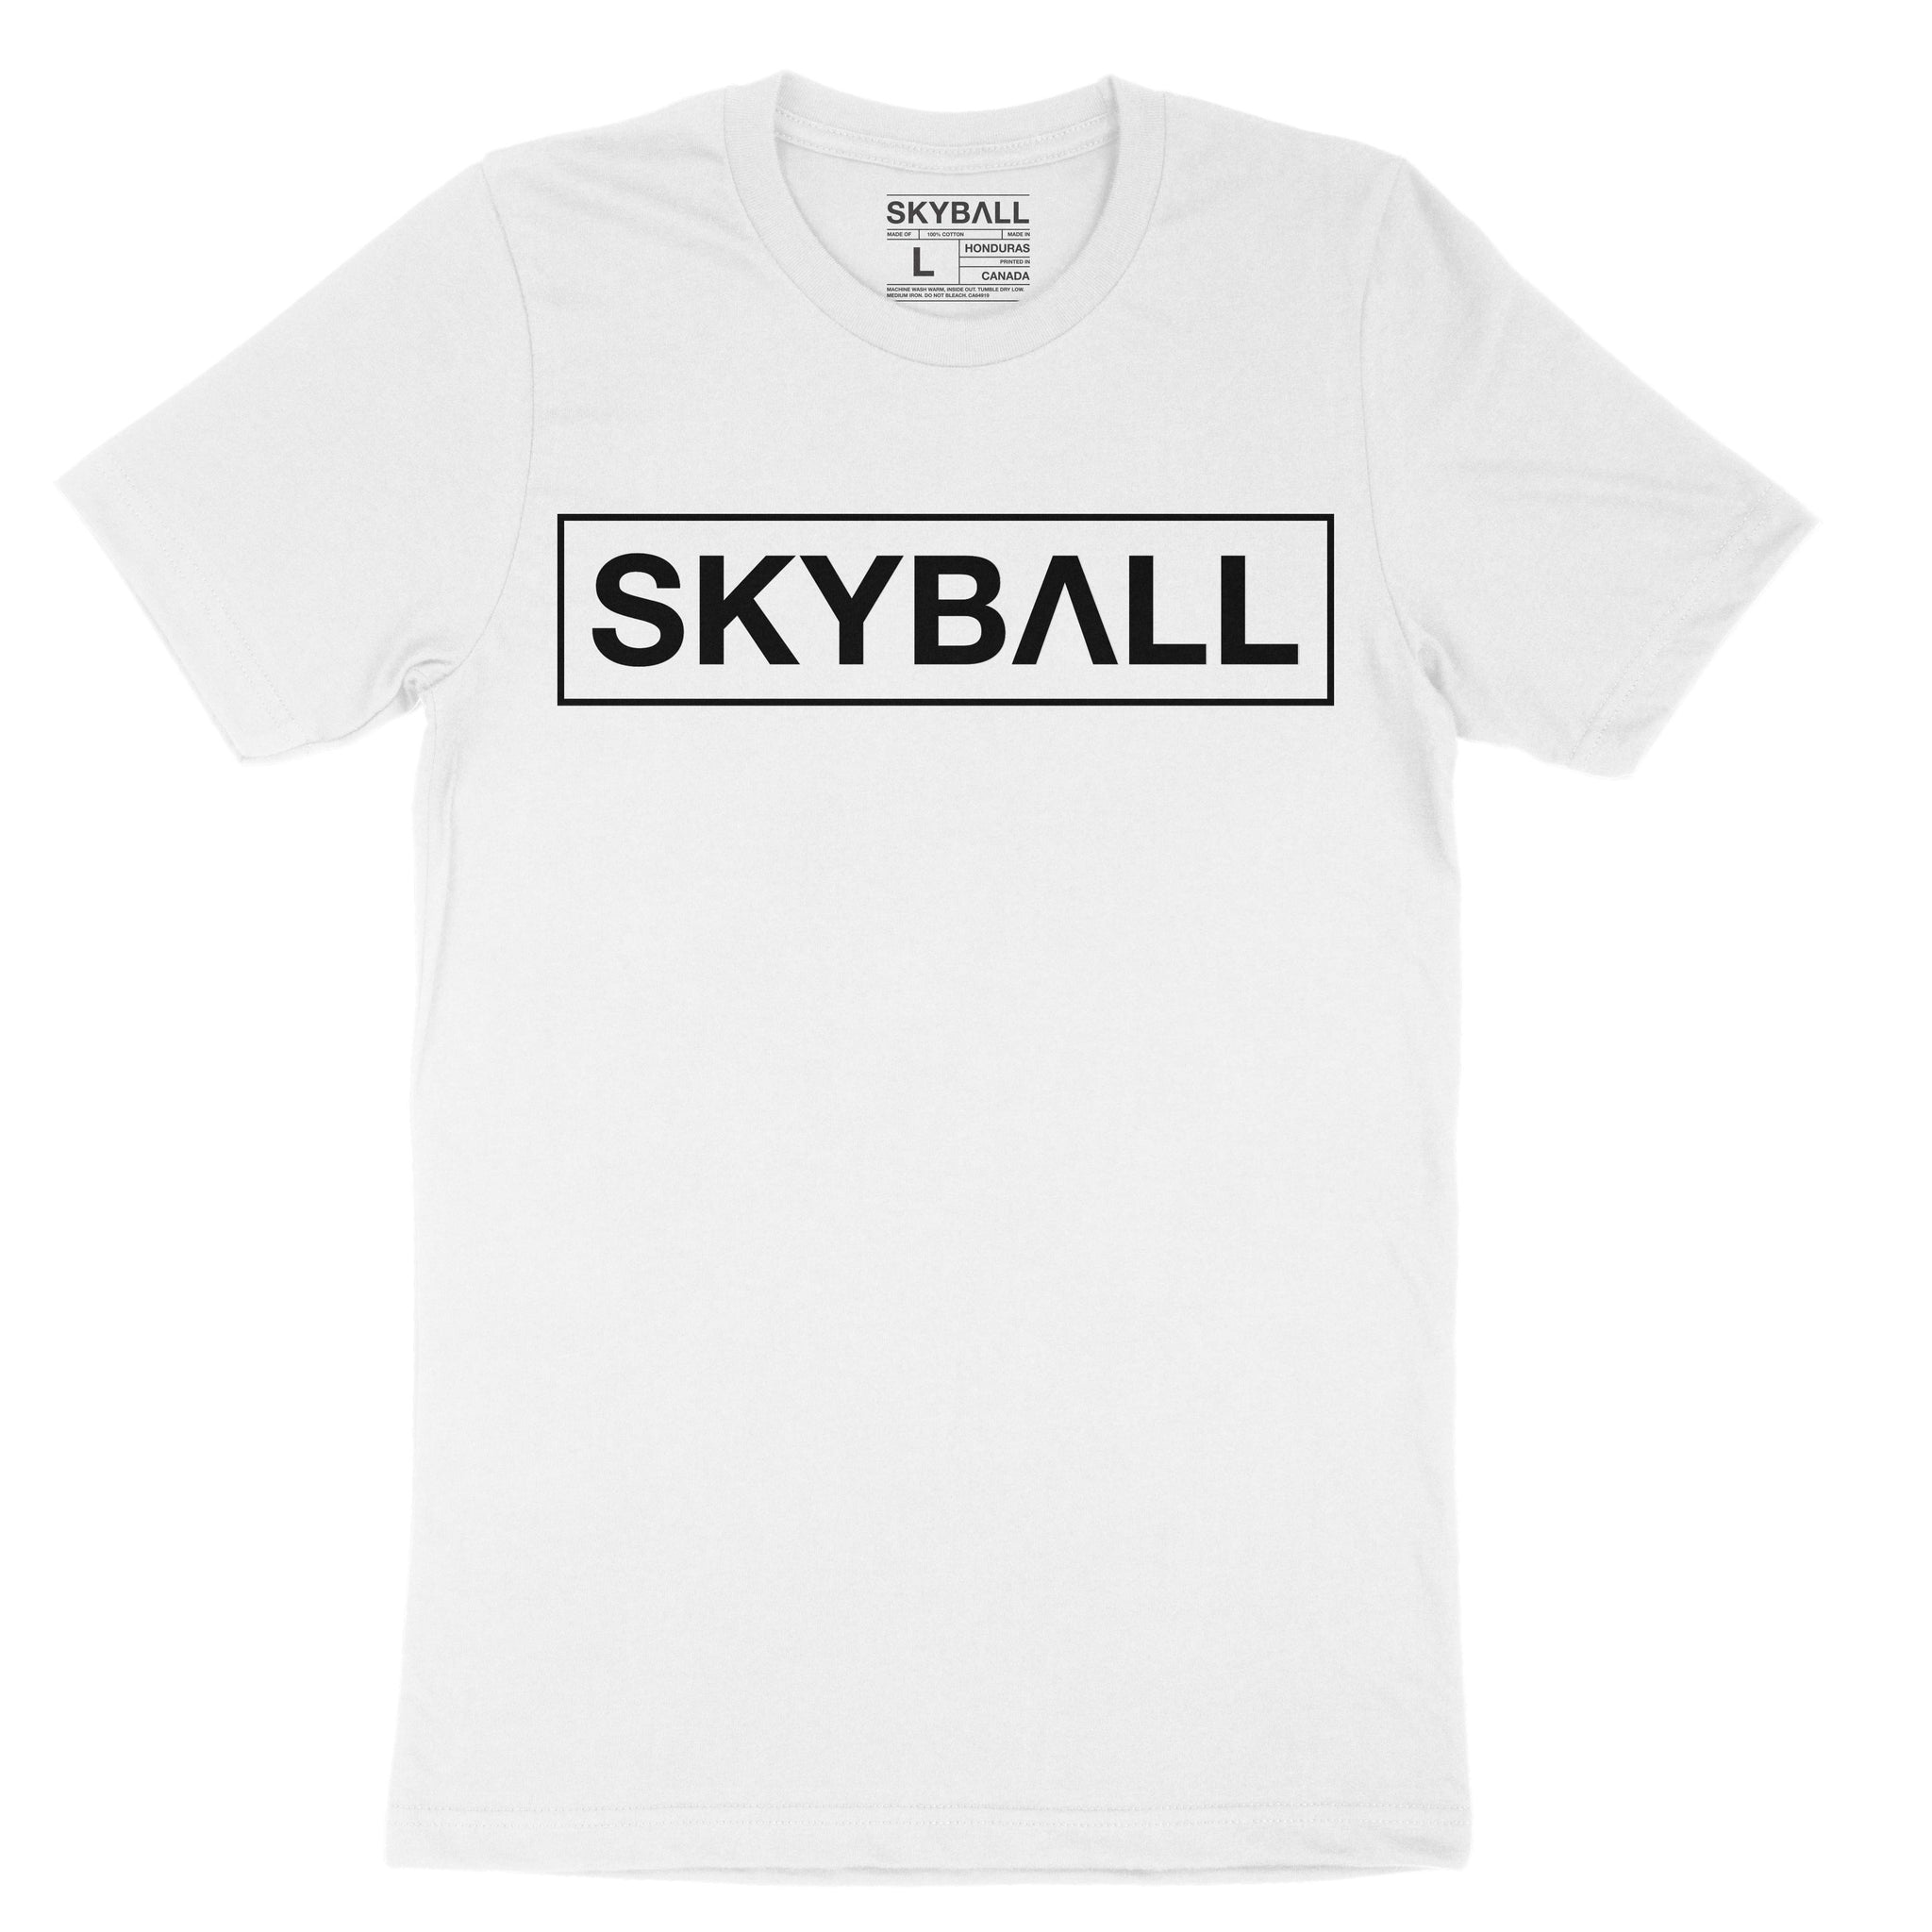 Skyball Beach Volleyball Apparel - In-Bounds T-Shirt